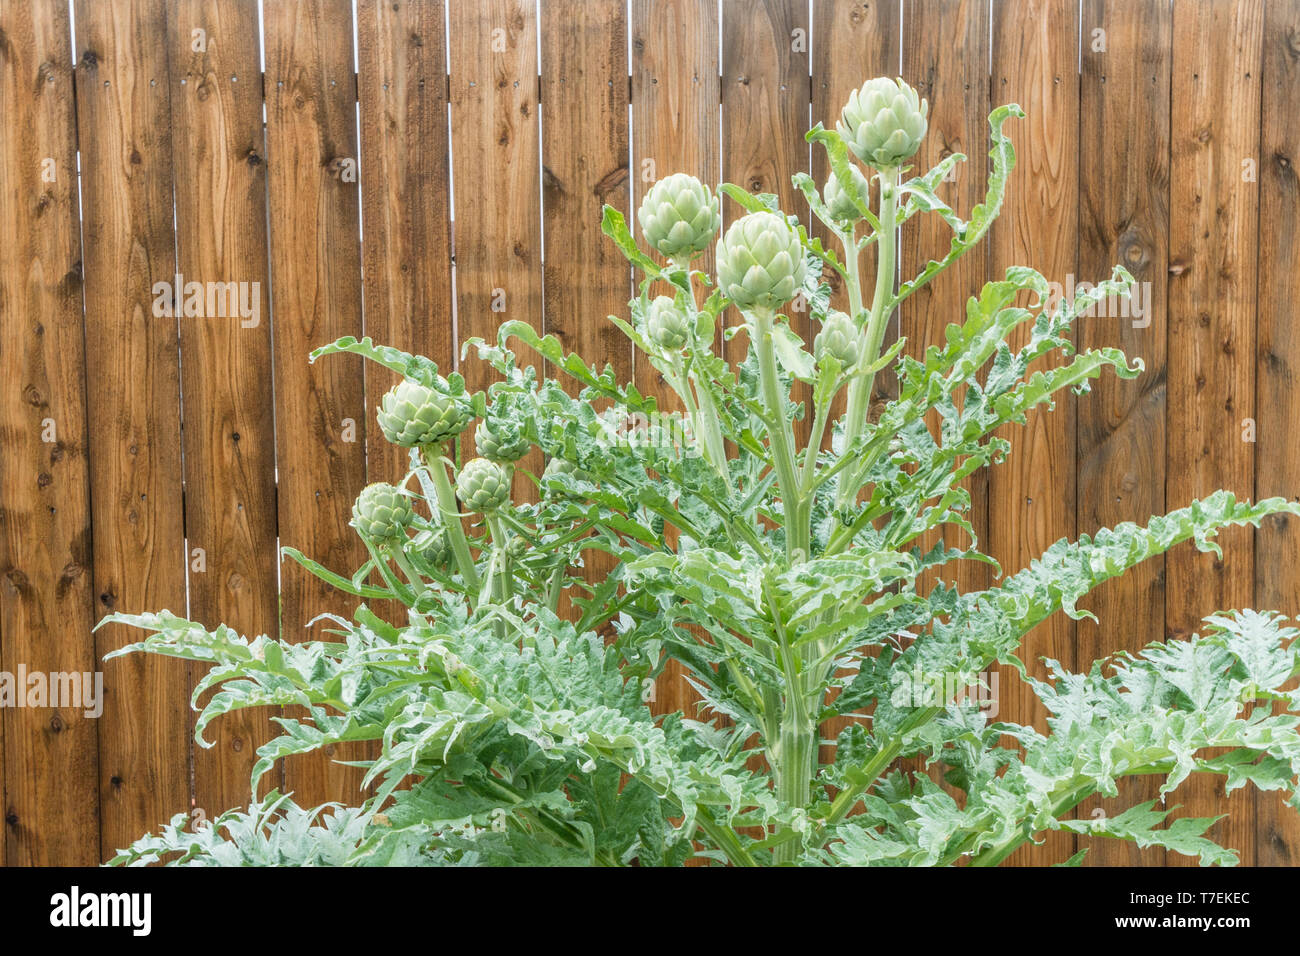 An artichoke plant grown in a home garden with ready to pick artichokes on it in front of a wooden fence. Stock Photo